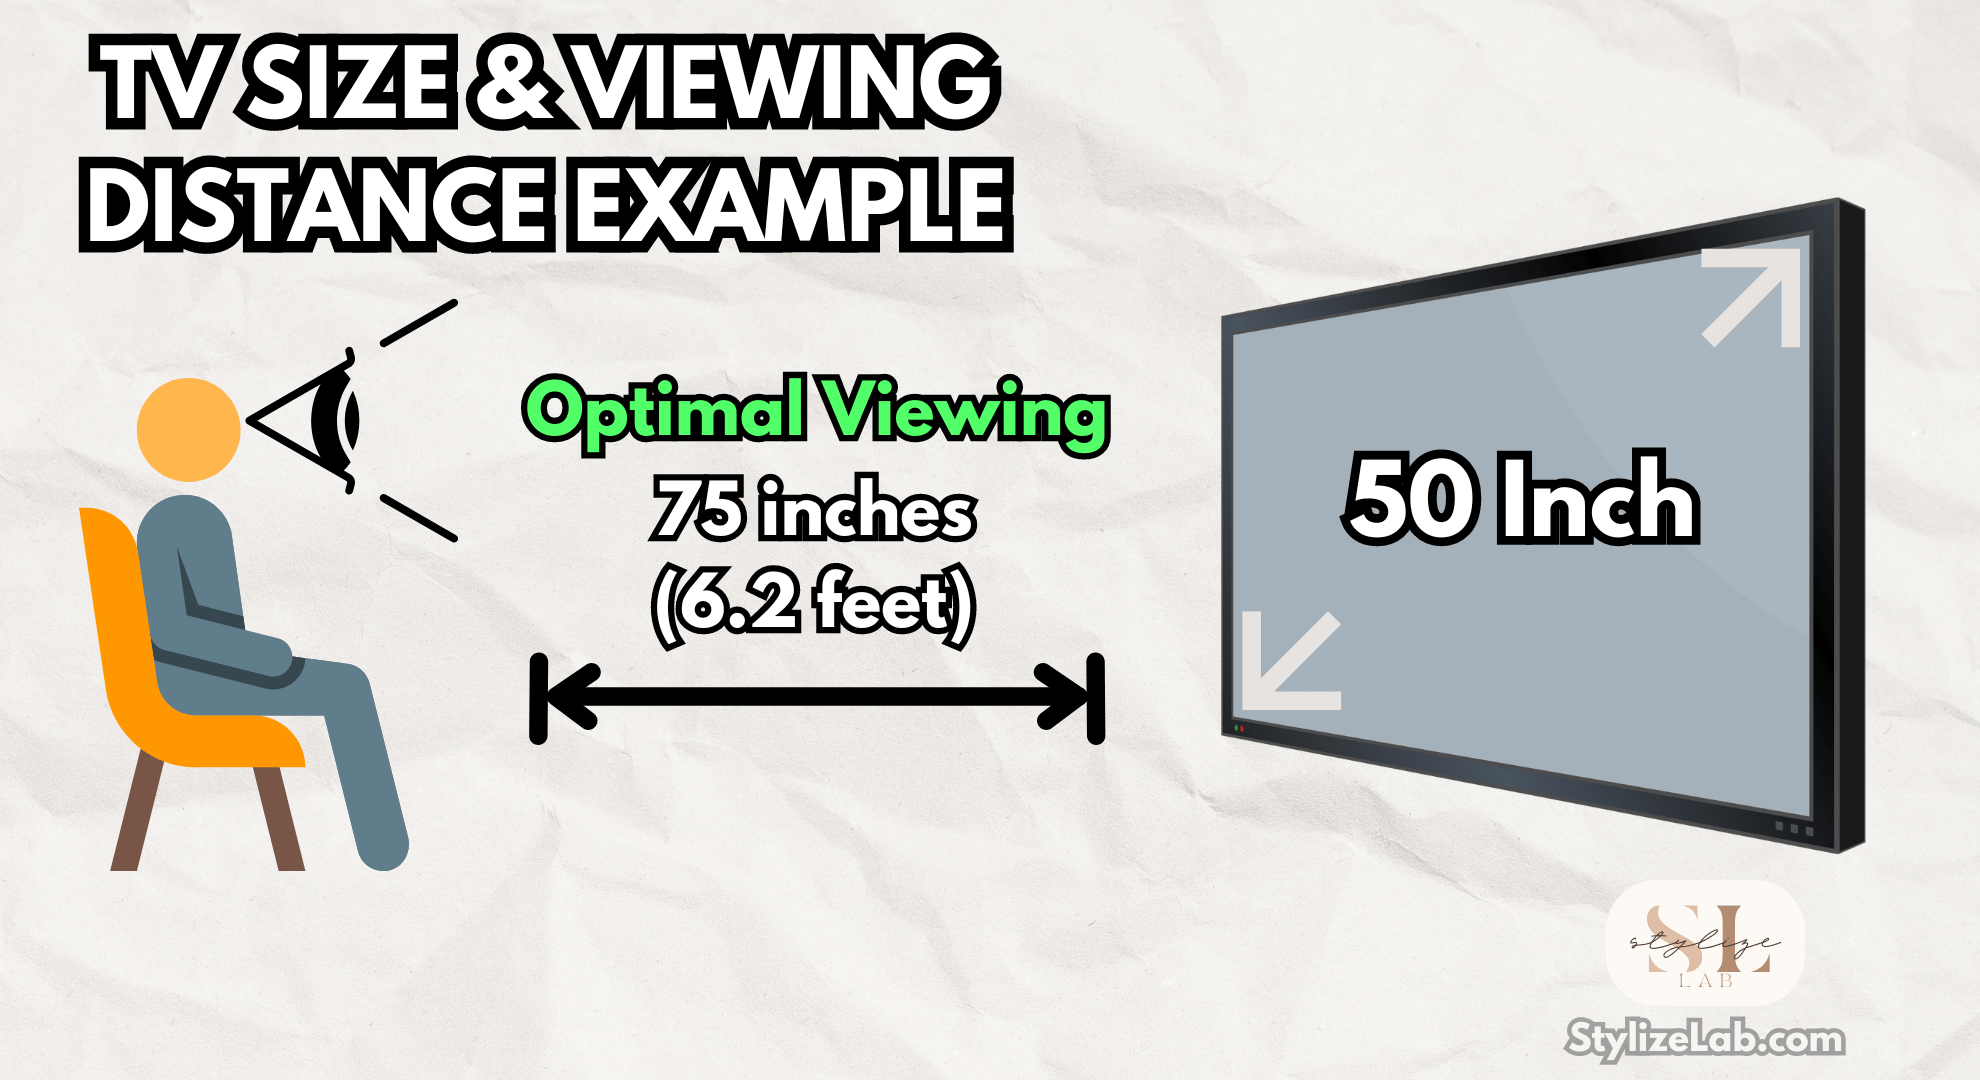 example 50 inch tv optimal viewing is 75 inches or 6.2 feet distance